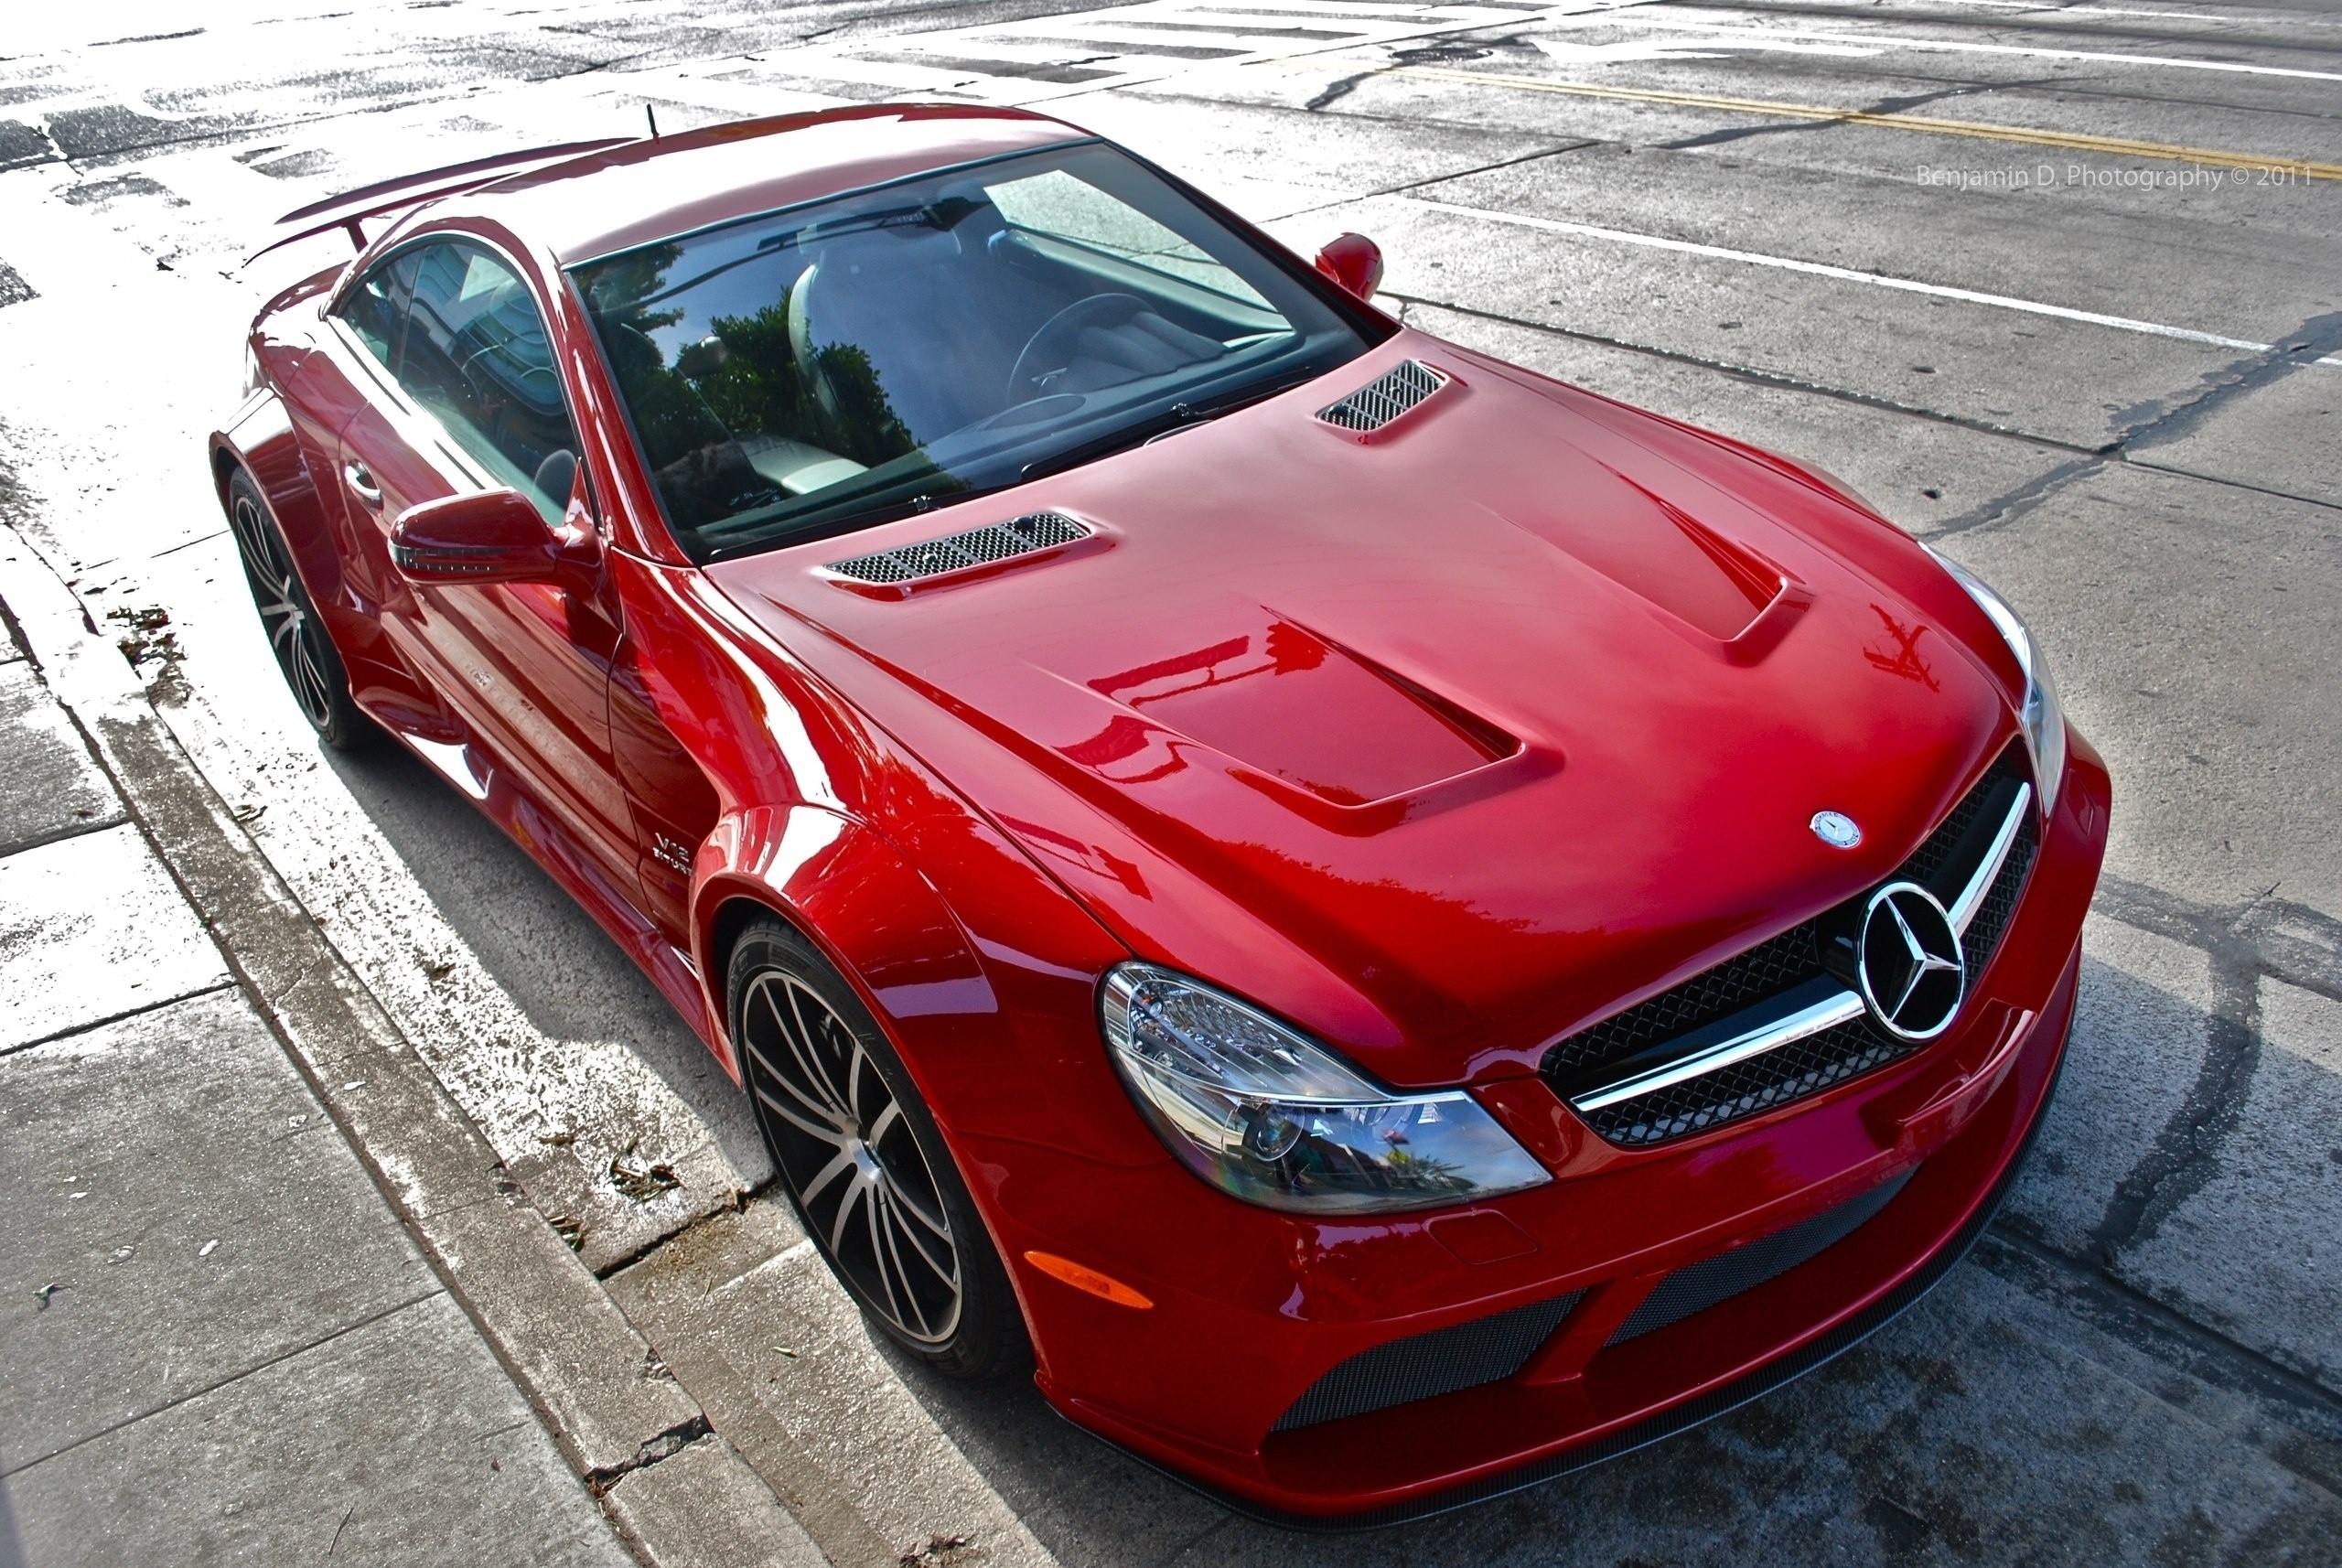 mercedes-benz sl65 amg, red, auto, cars New Lock Screen Backgrounds